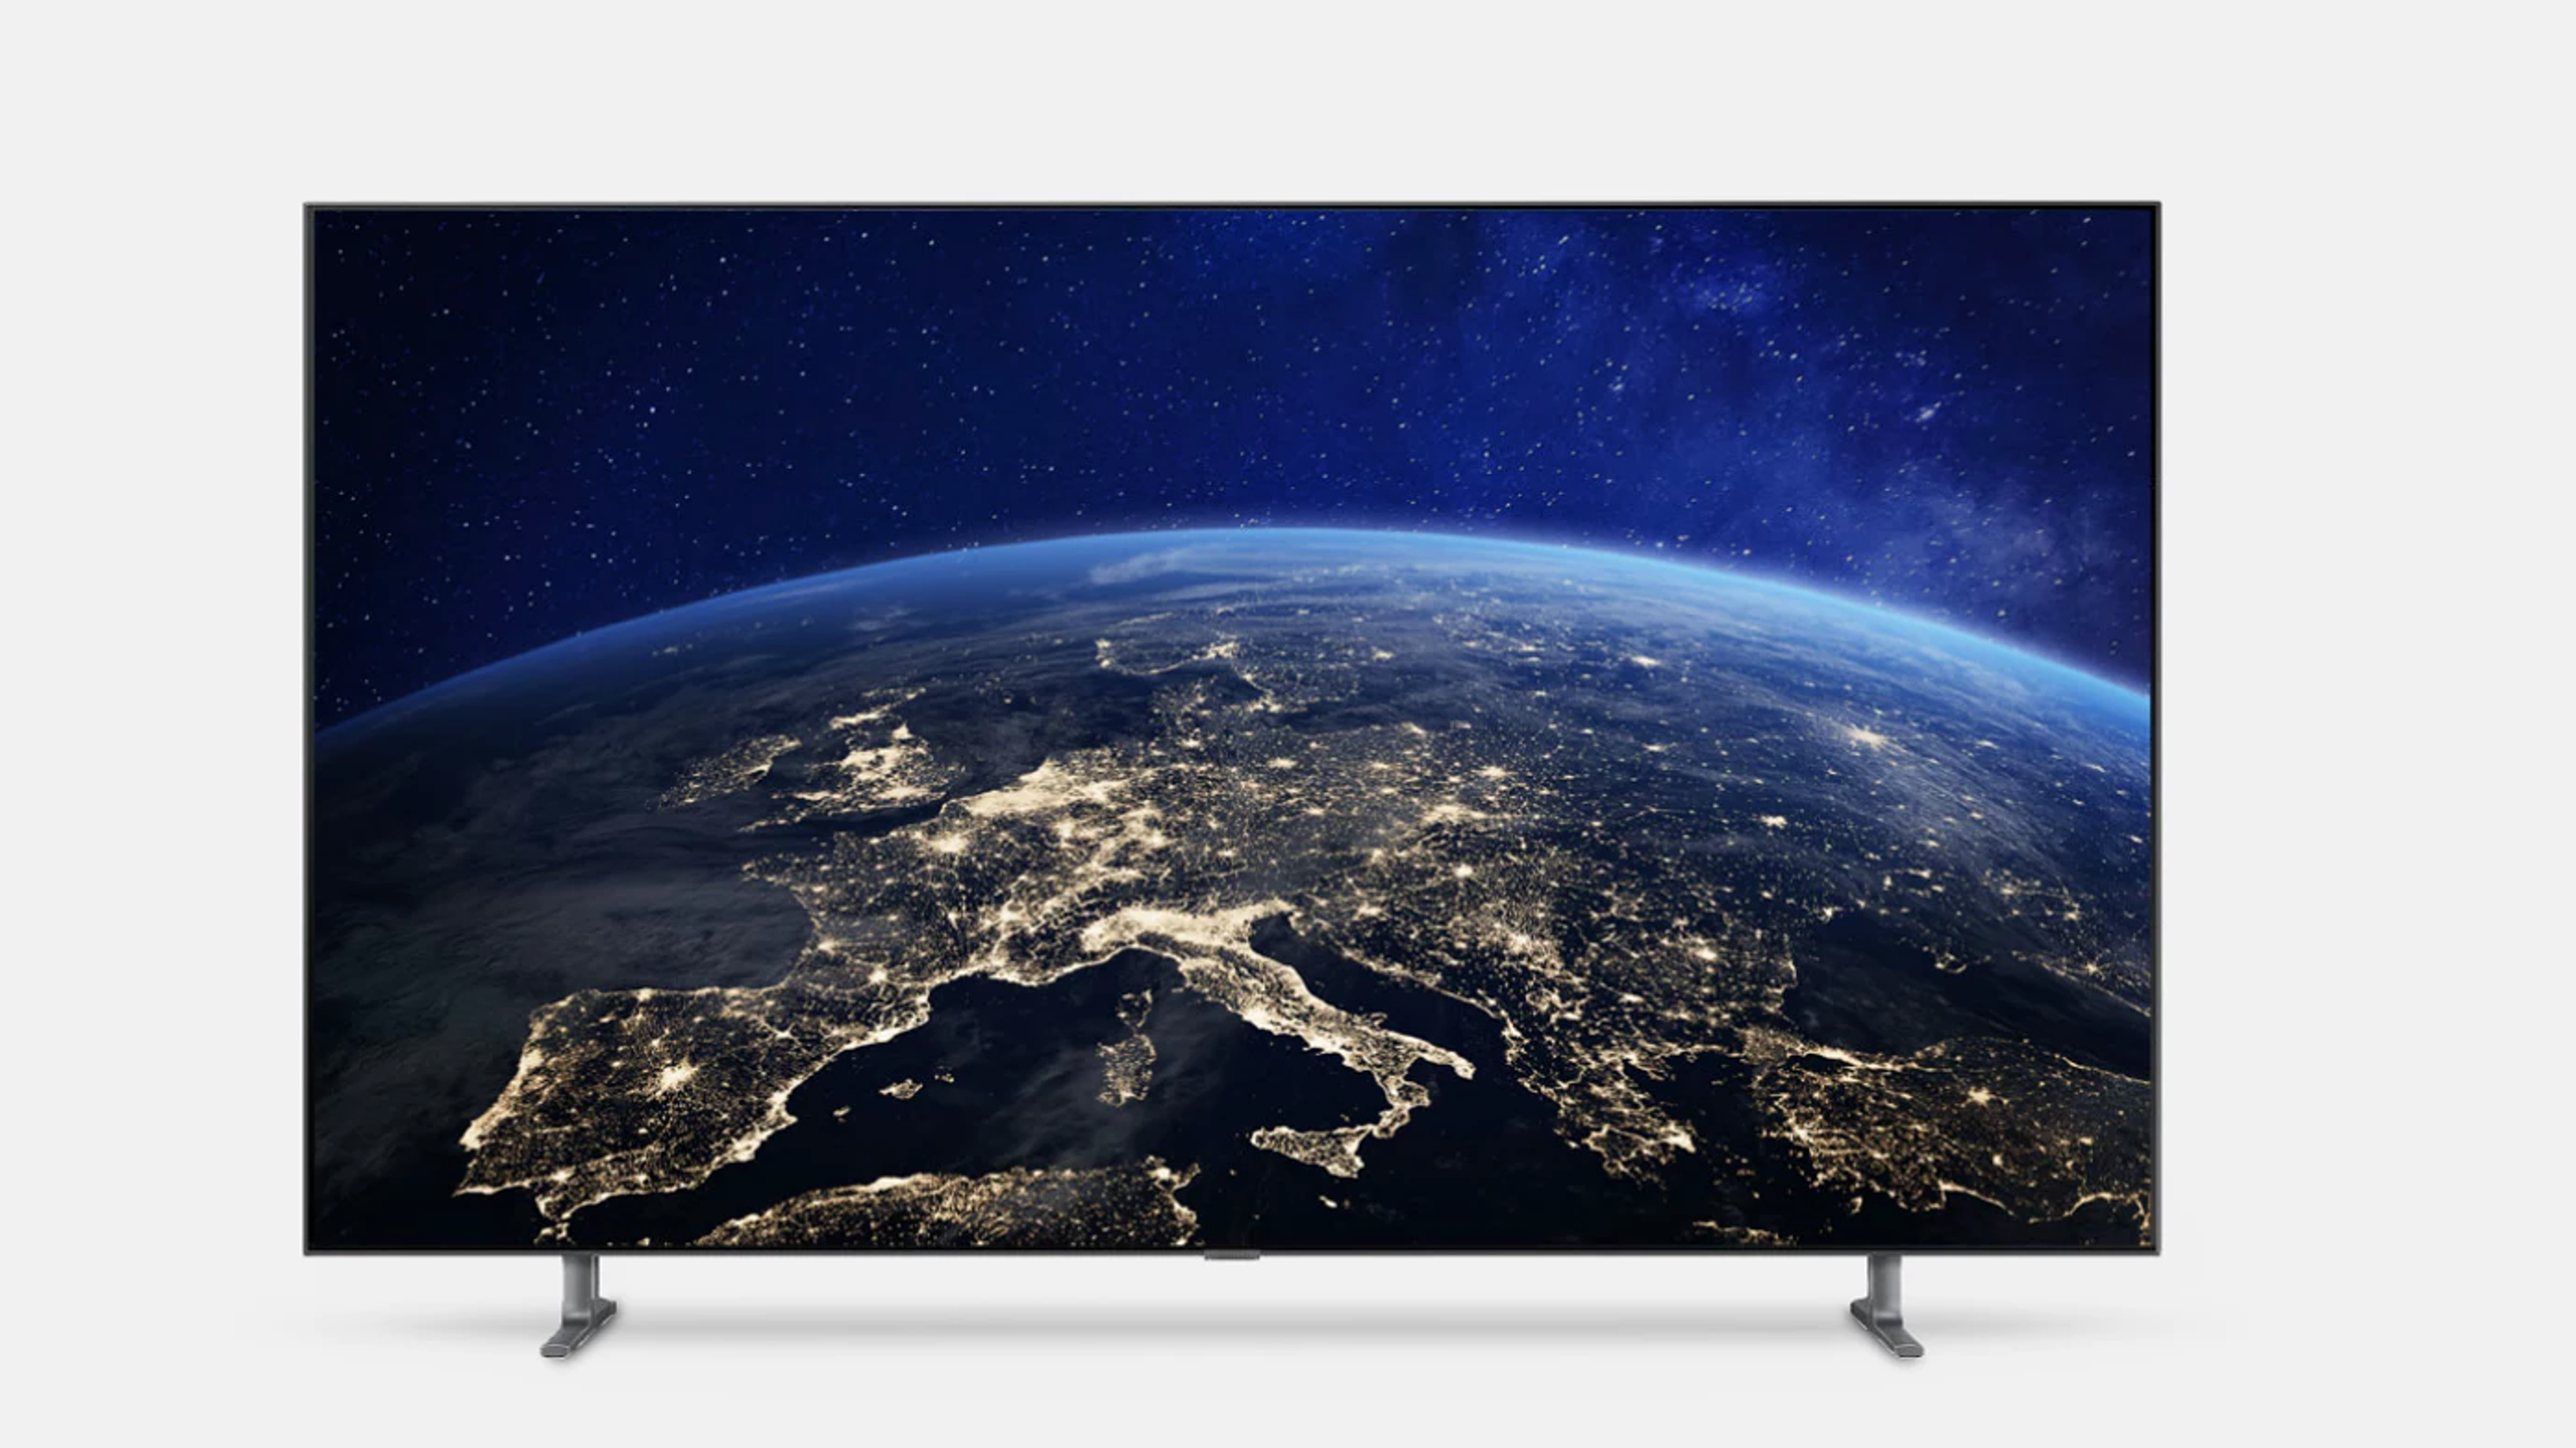 Samsung&#39;s Q80R QLED smart 4K UHD TV is on sale for a limited time